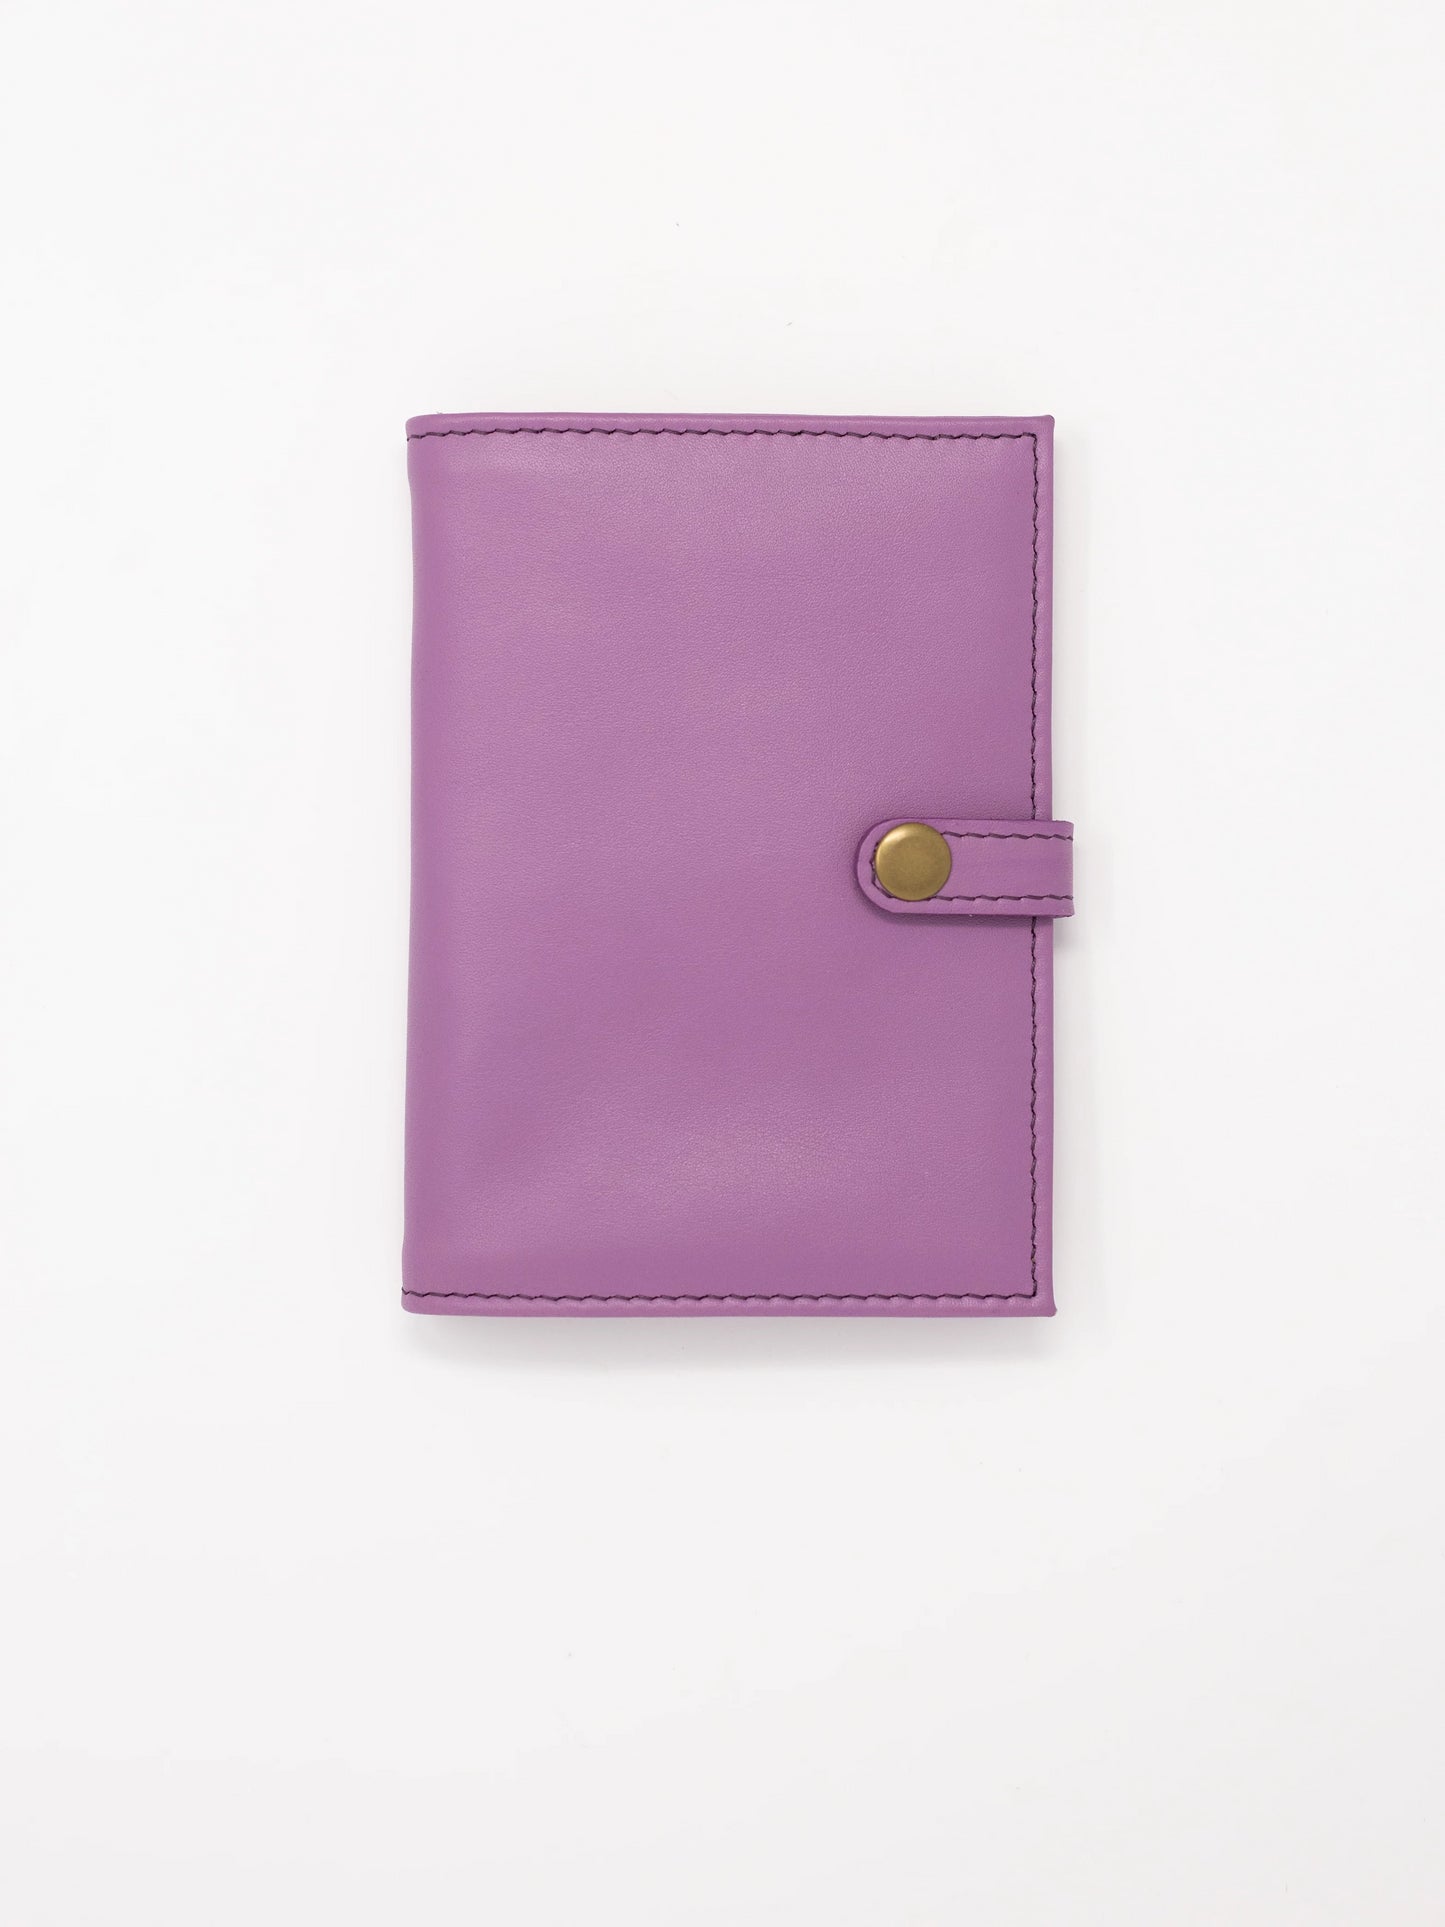 Leather Travel wallet -Lavender Passport wallets by payton james- leather bags nashville